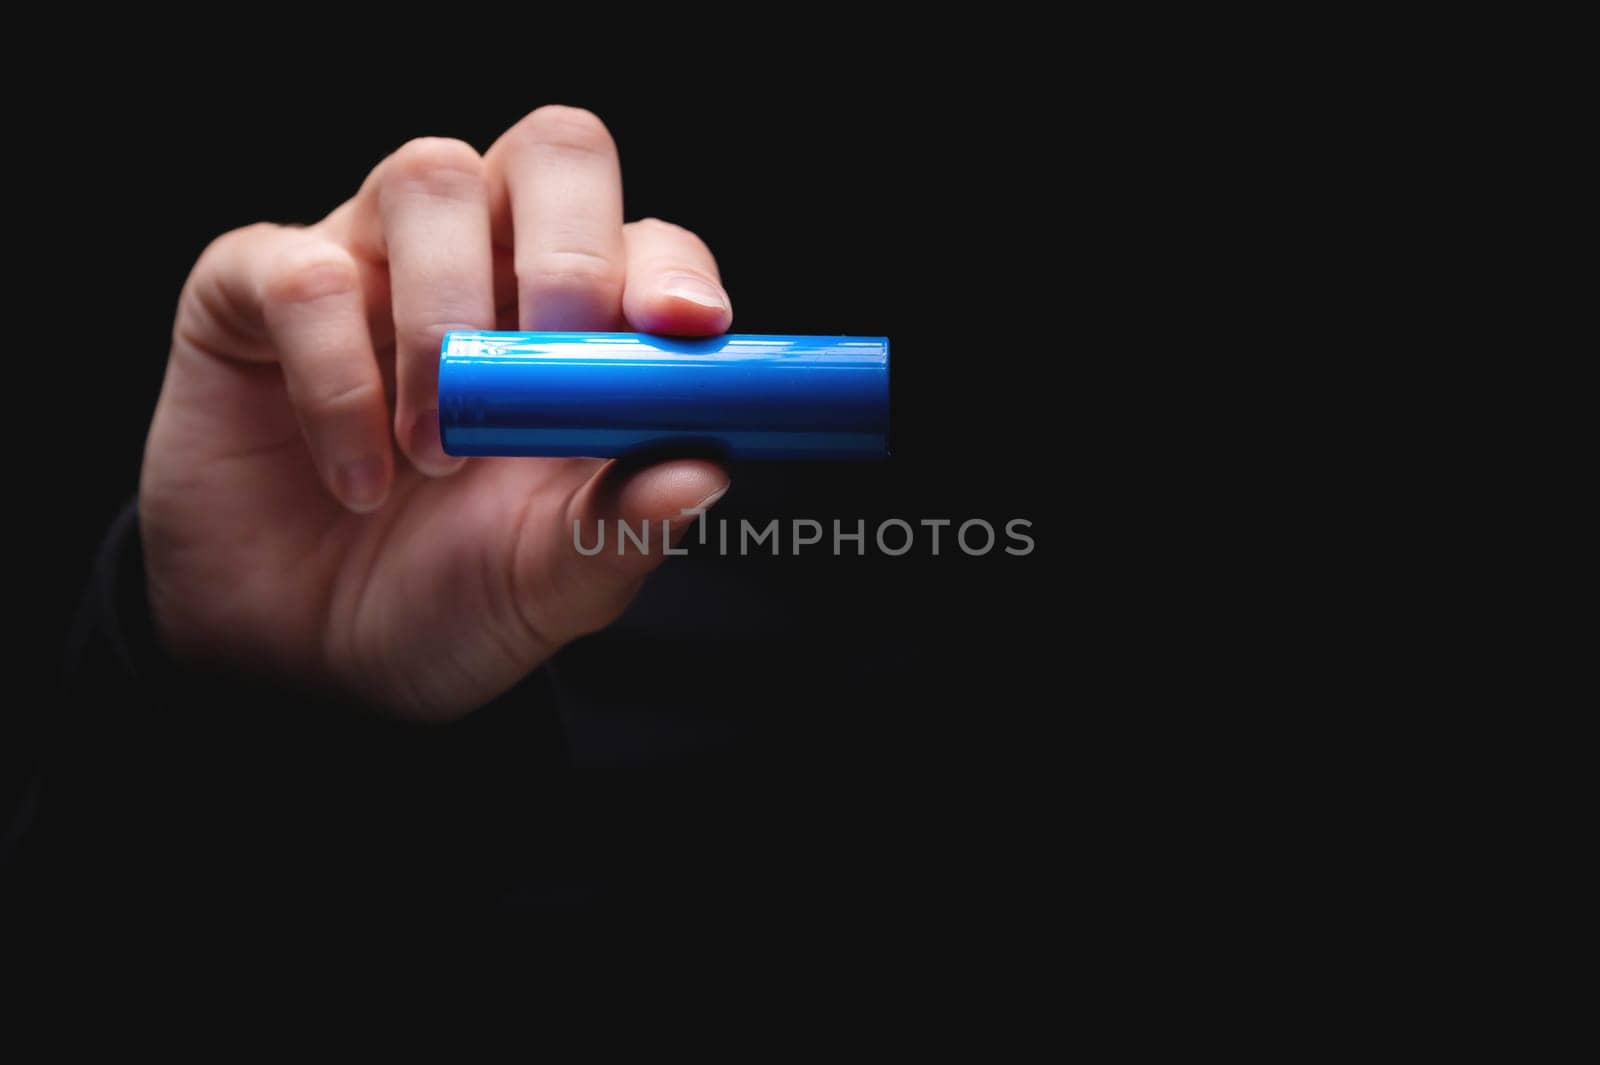 Lithium-ion battery for power in a human hand, on a black background. Woman's hand showing a battery, close-up, mockup by yanik88